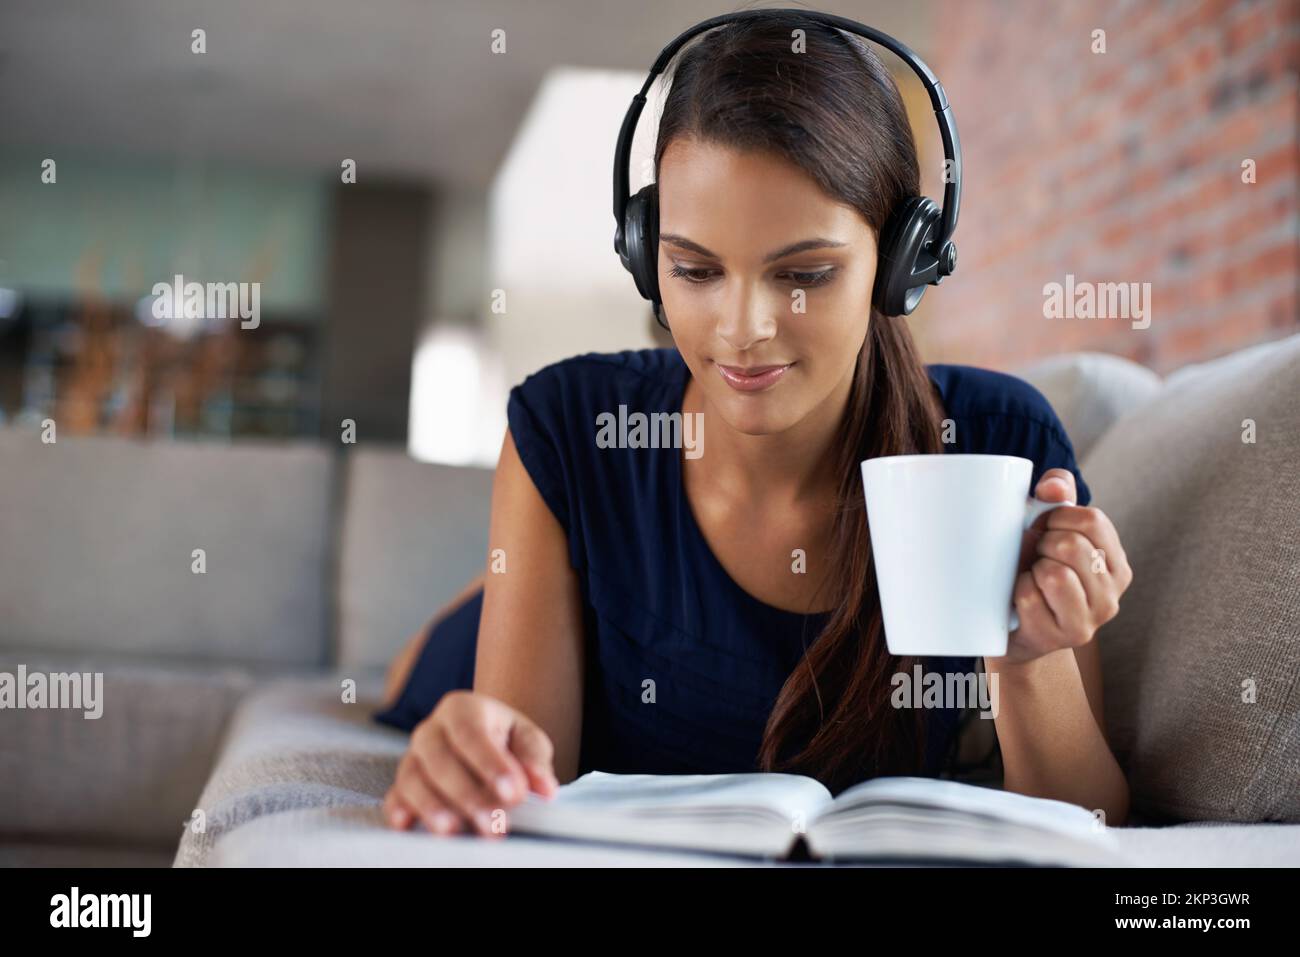 Catching up with hobbies. a beautiful young woman relaxing on her couch with music and a good book. Stock Photo